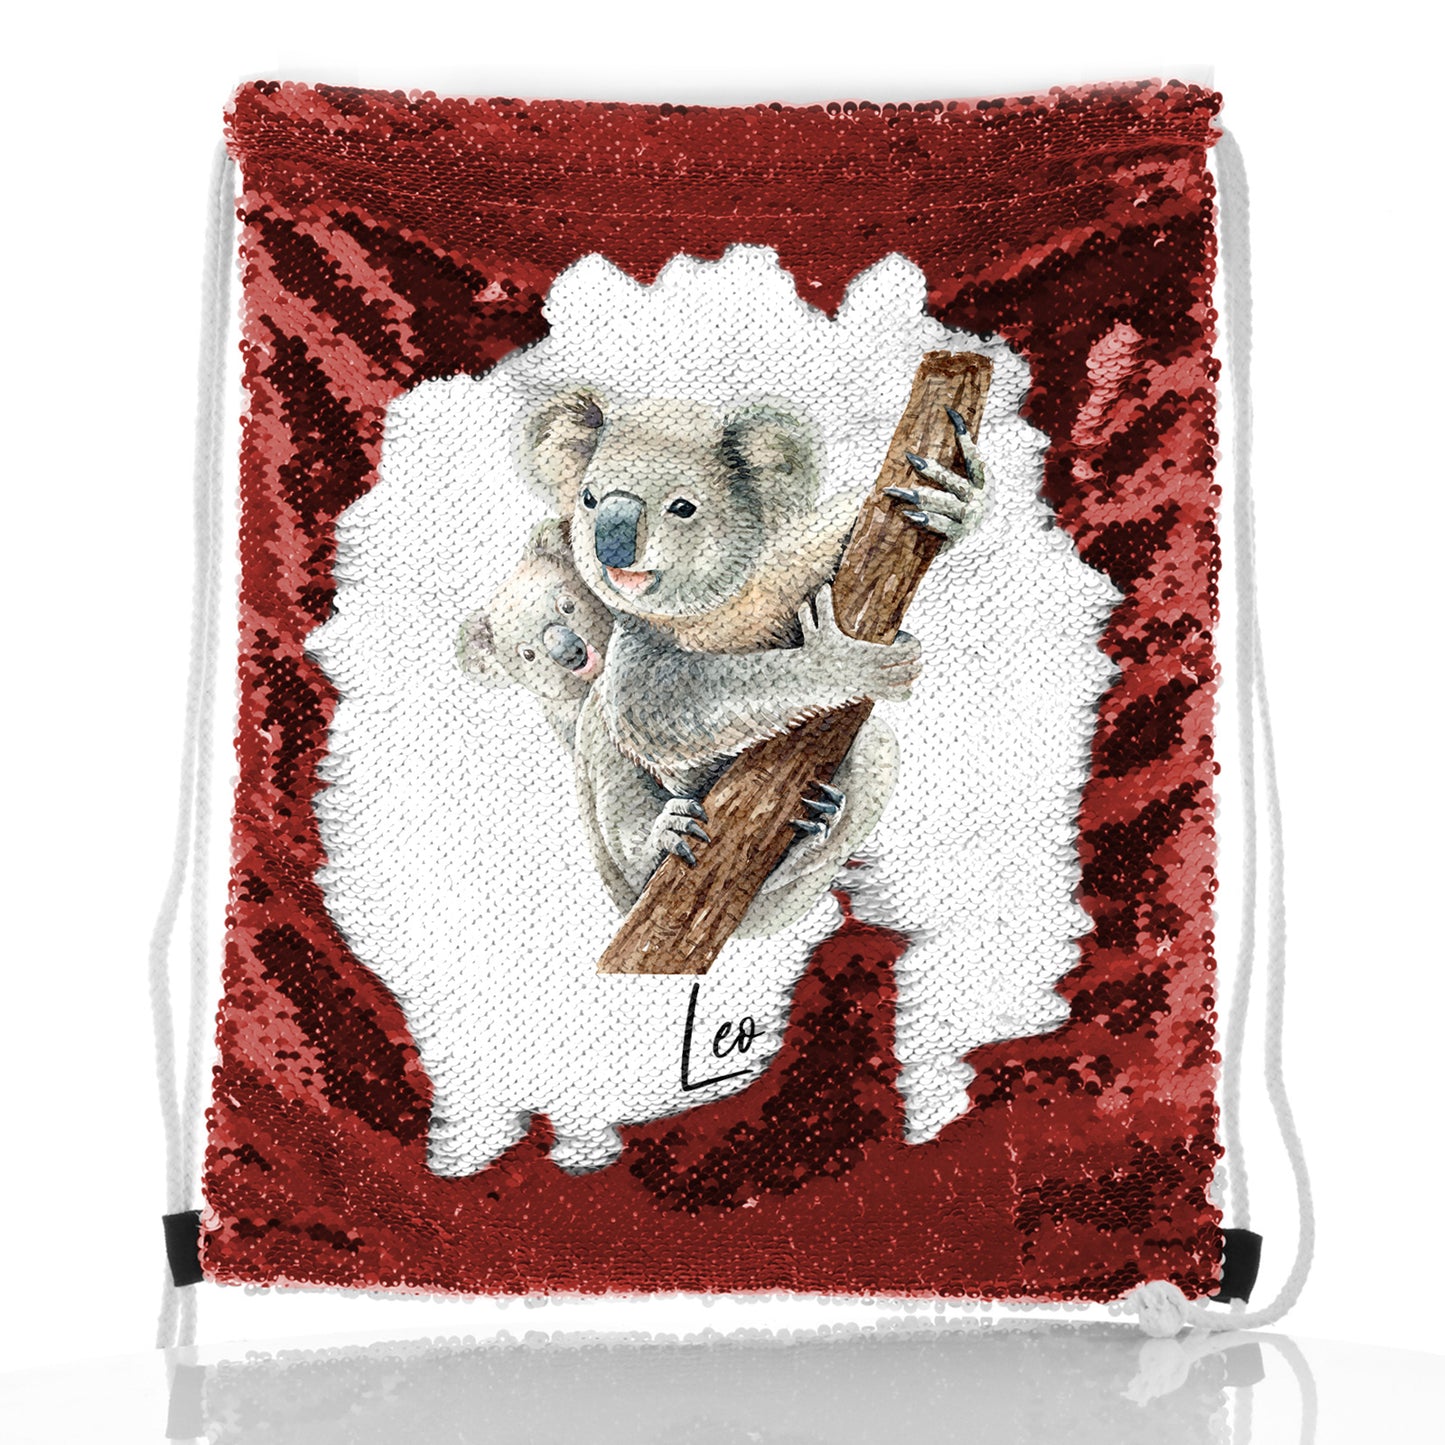 Personalised Sequin Drawstring Backpack with Welcoming Text and Climbing Mum and Baby Koalas